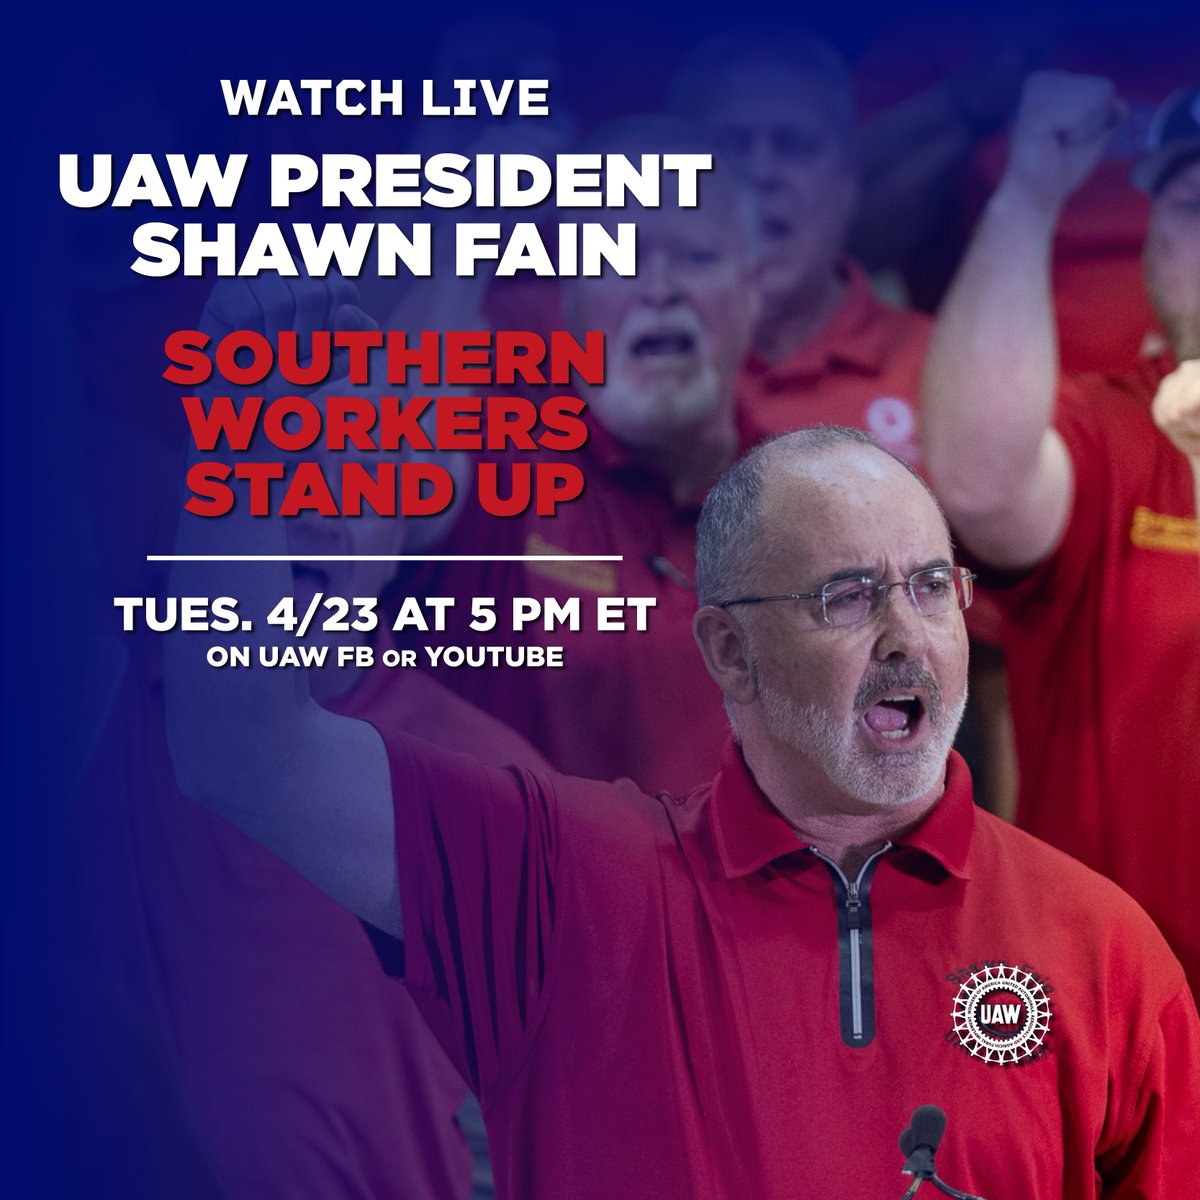 Southern workers are standing up! Tune in to hear President Shawn Fain discuss the workers' fight at Volkswagen, Daimler, Mercedes, and beyond. Watch on UAW YouTube or on Facebook Live. Tues., 4/23 at 5 pm ET. youtube.com/@uawunion #StandUpUAW